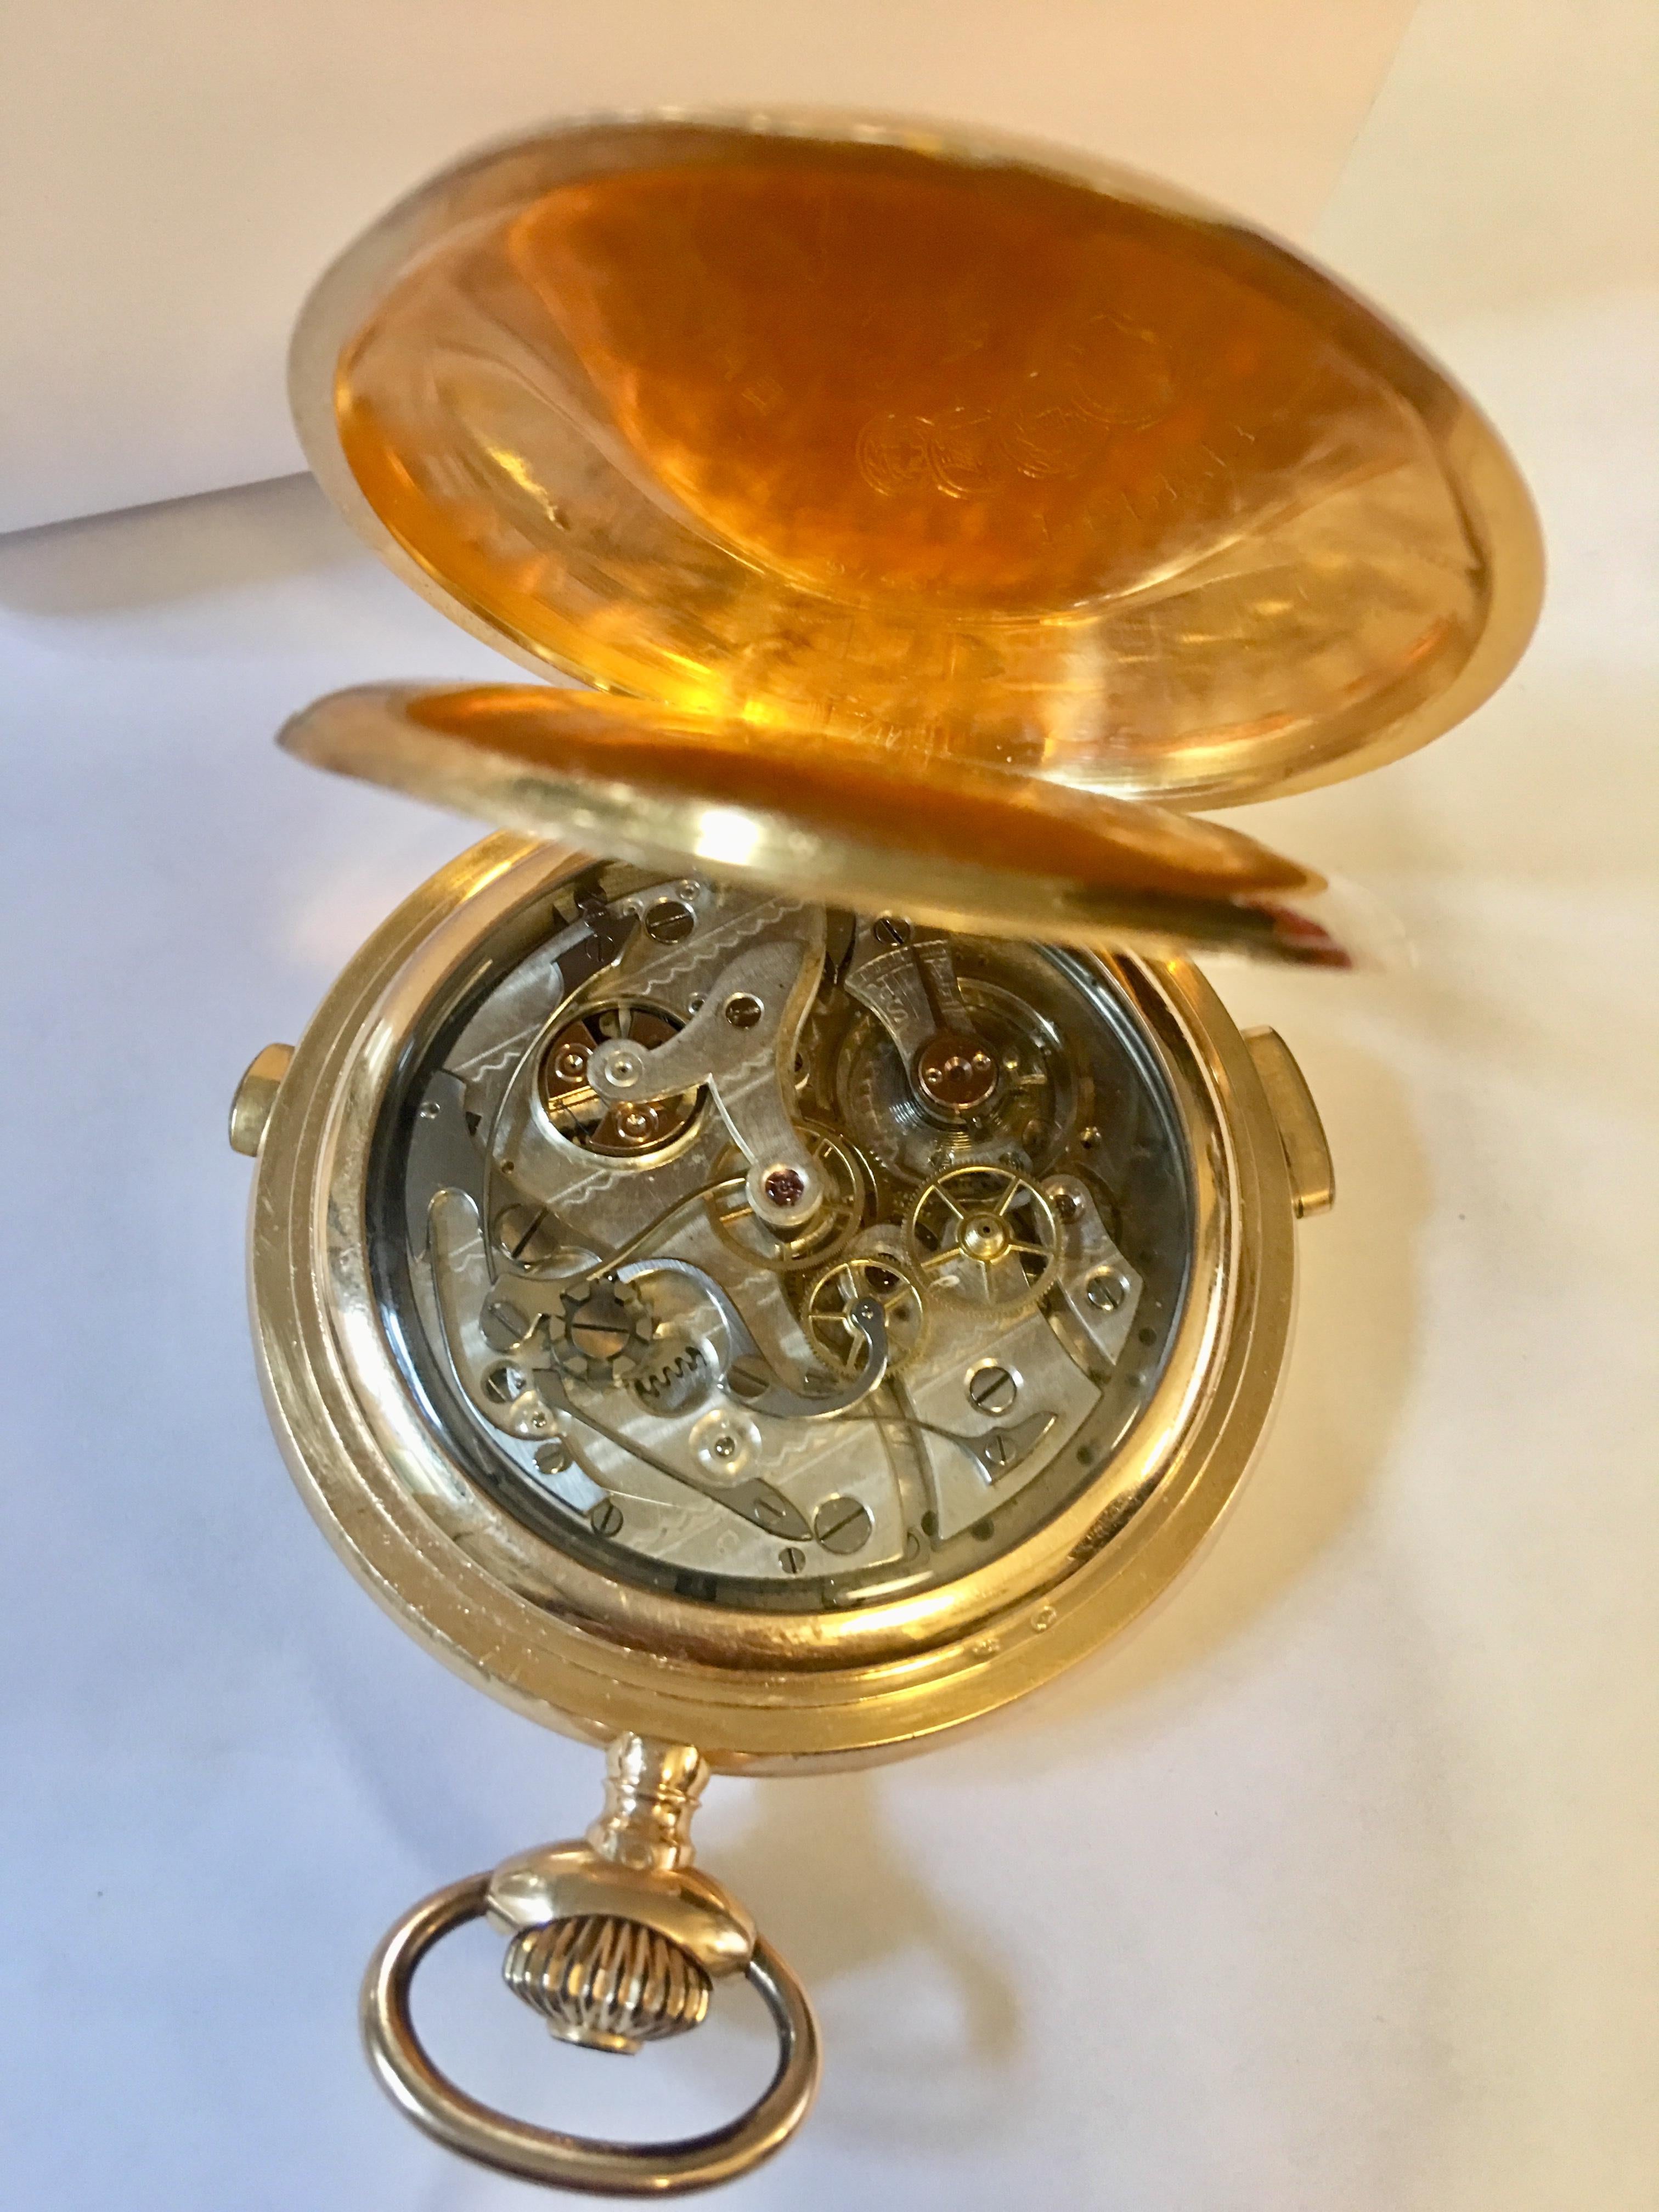 18 Karat Gold Minute Repeater Full Pocket Watch and Chronograph 2